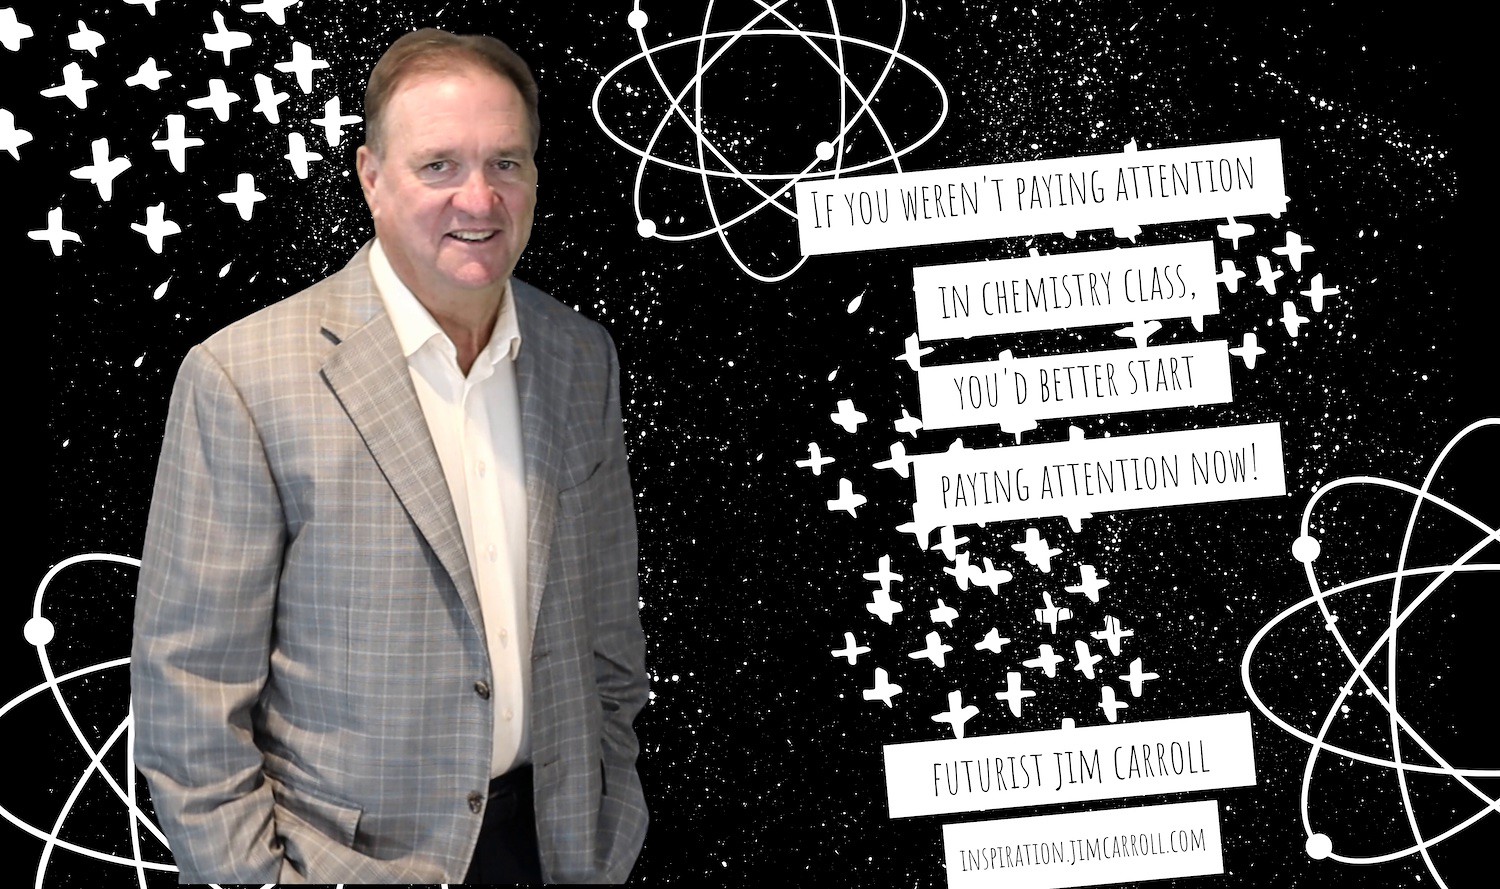 "If you weren't paying attention in chemistry class, you d better start paying attention now!" - Futurist Jim Carroll